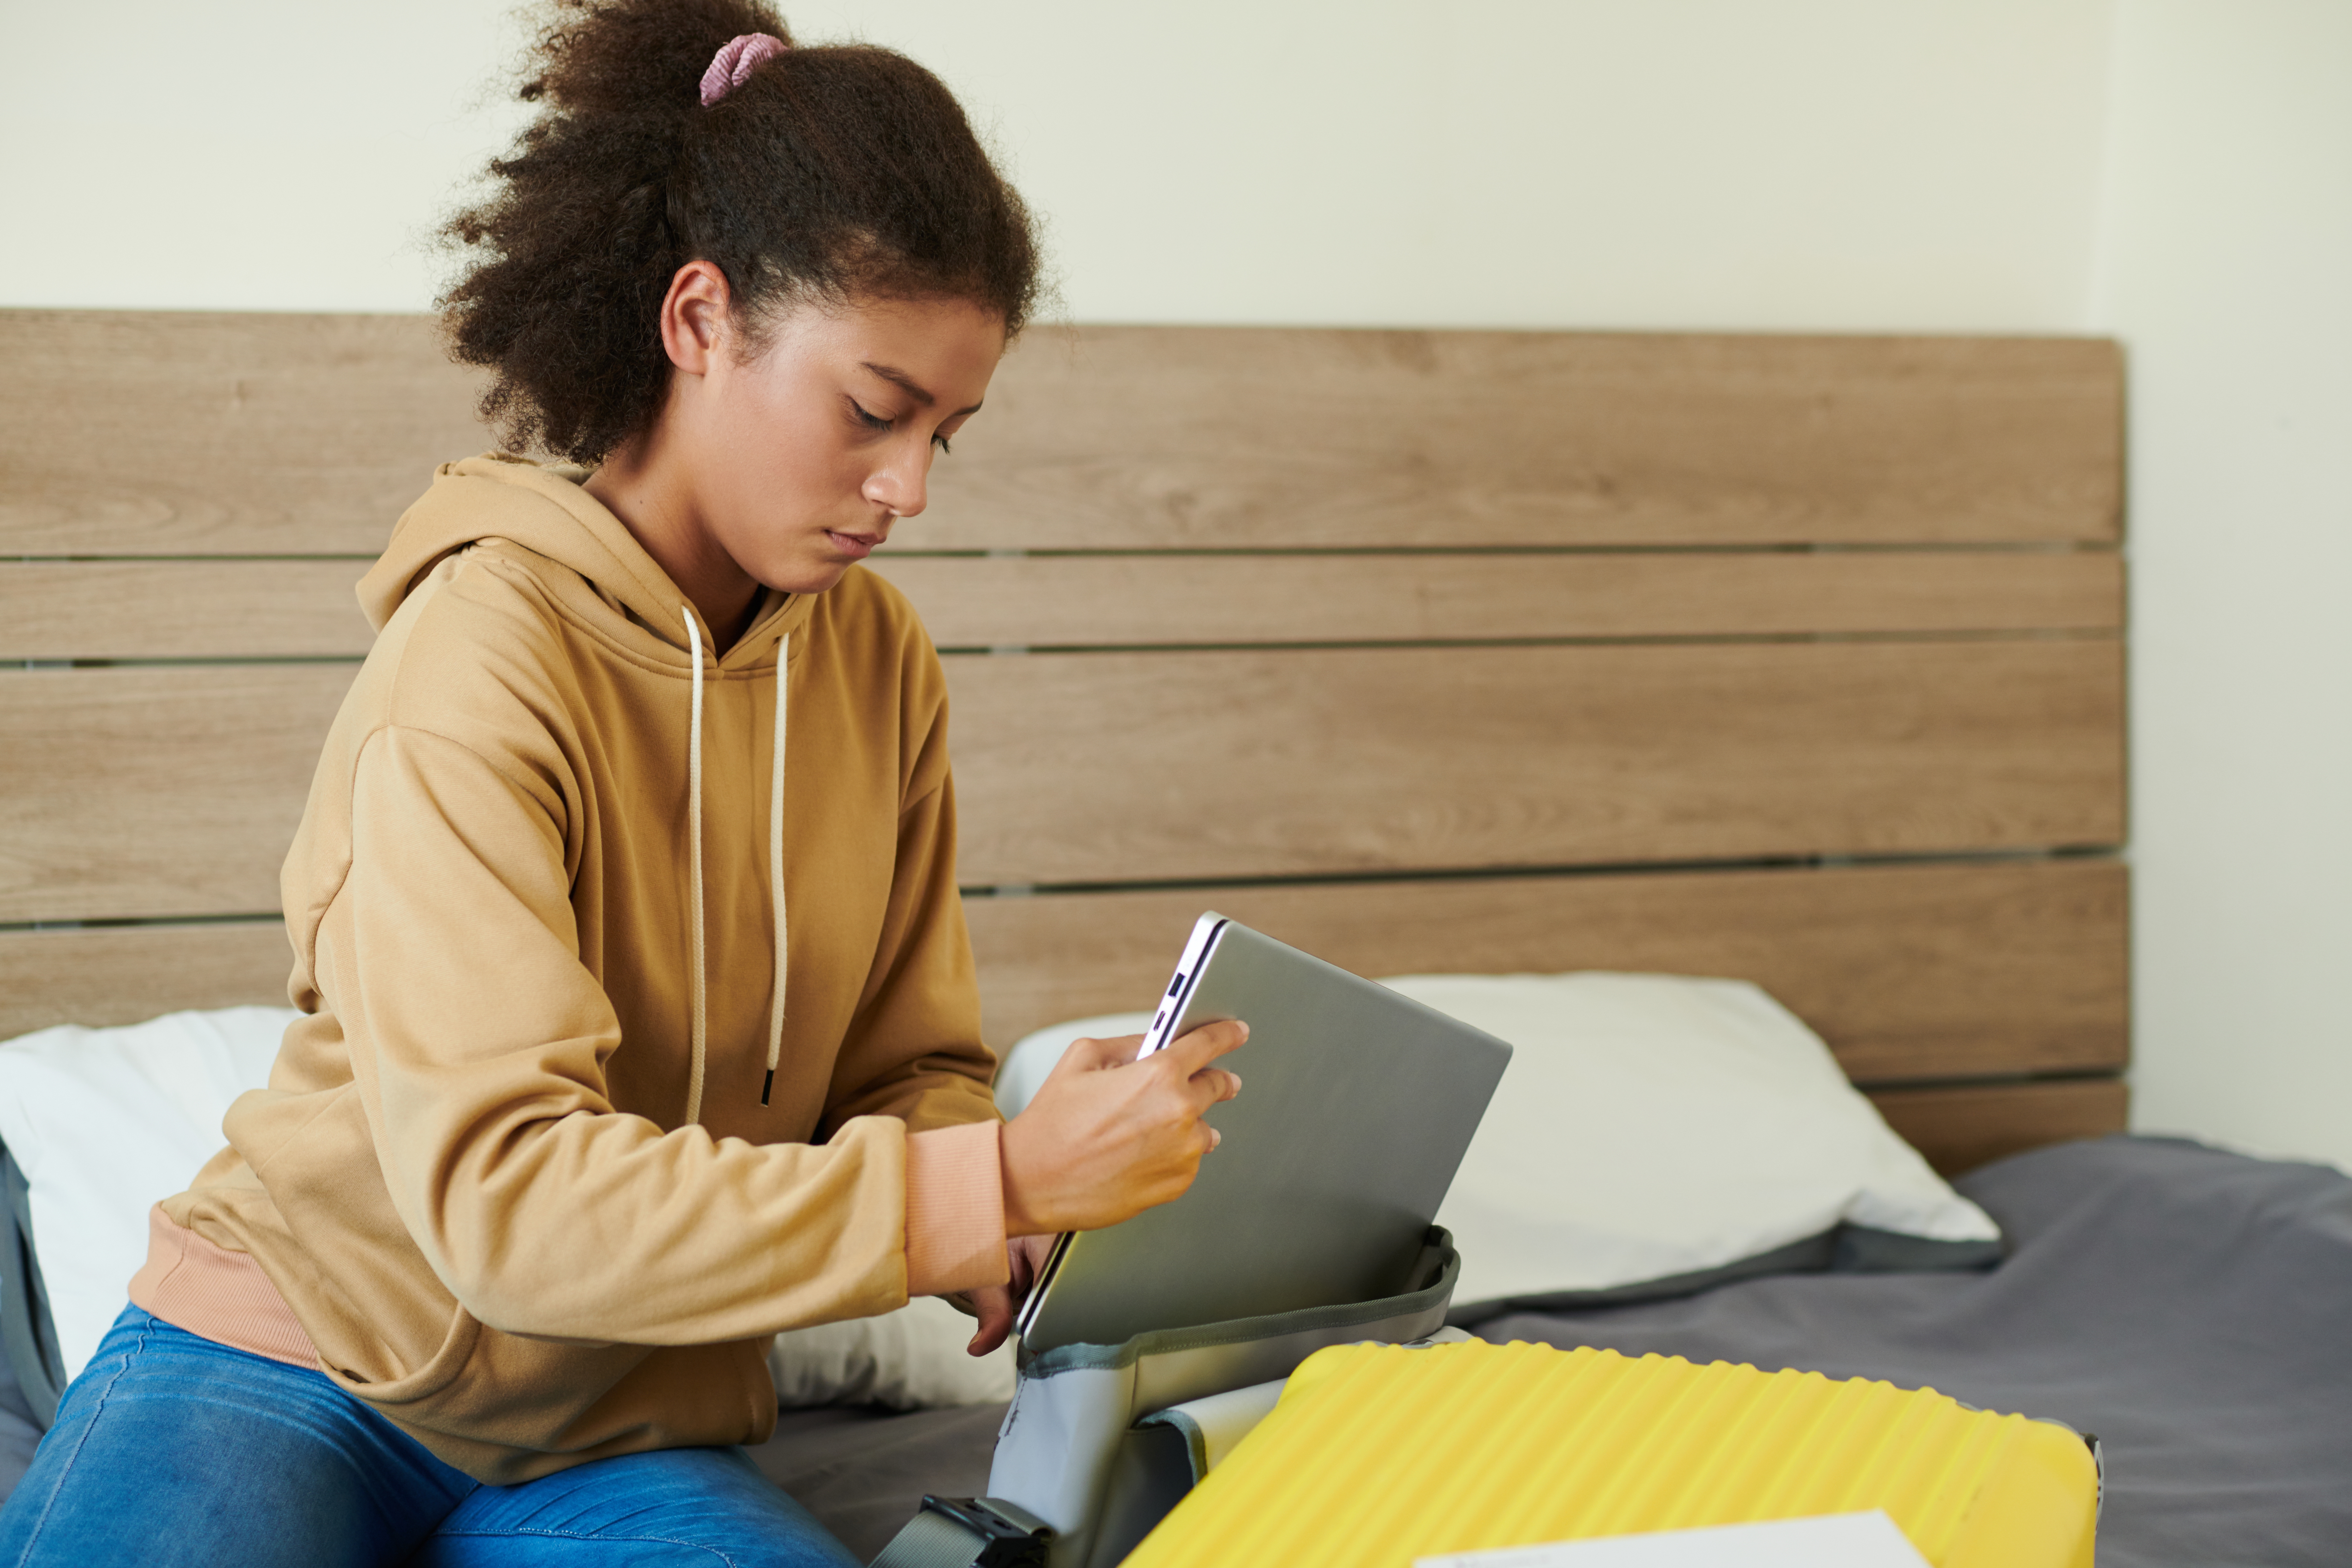 Serious teenage girl putting laptop in bag when packing to leave for university | Source: Shutterstock.com